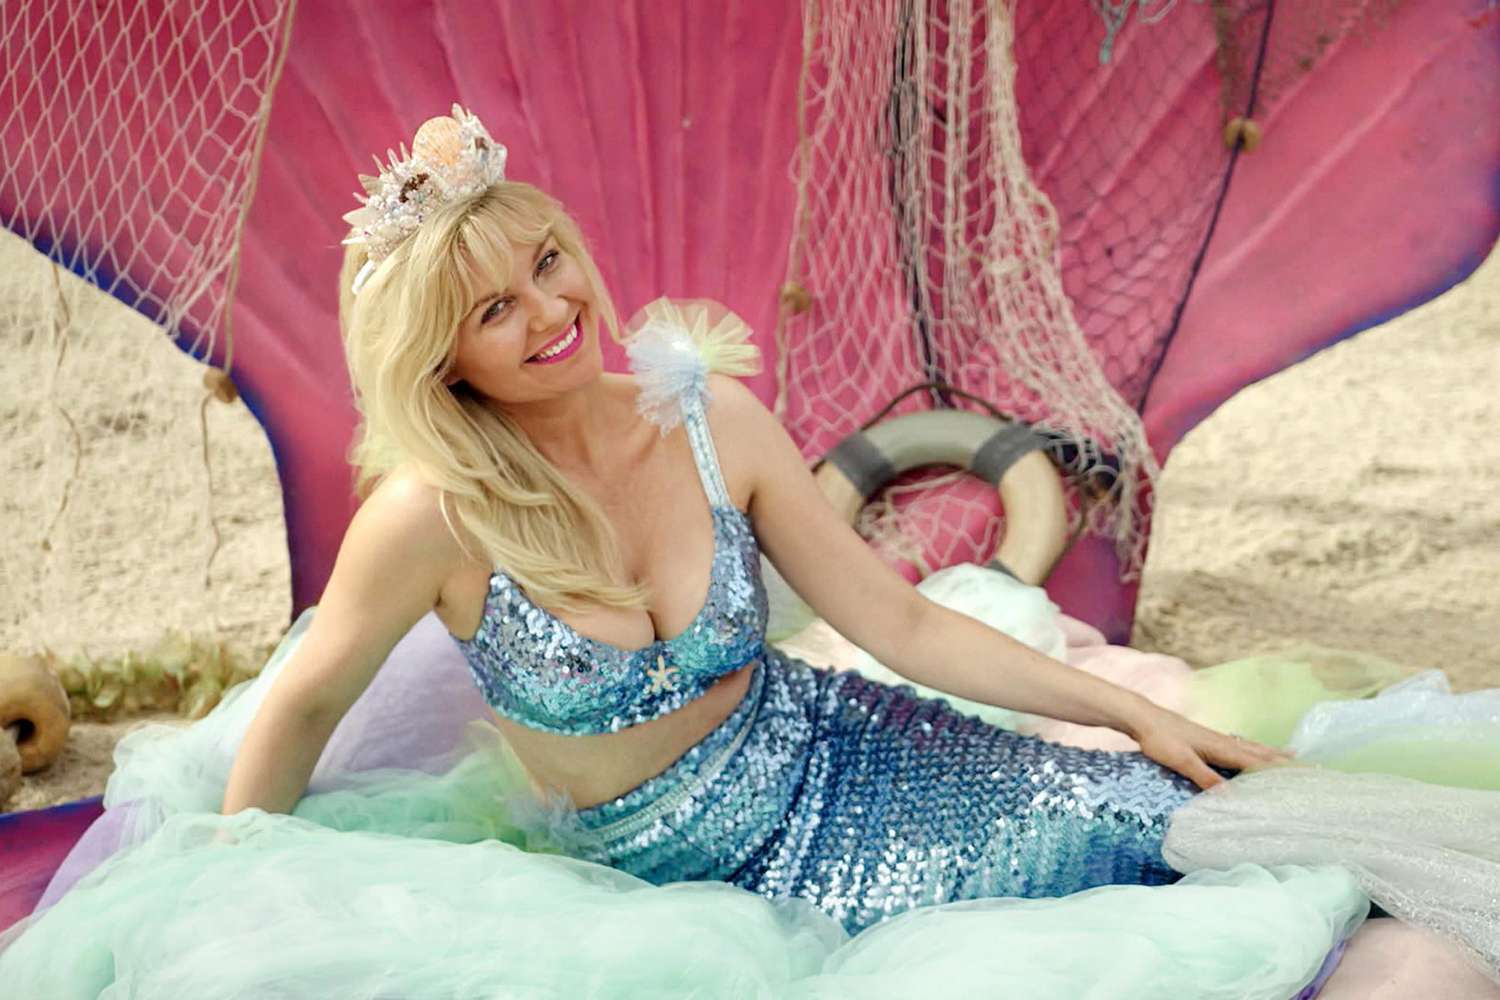 Kirsten Dunst as Krystal Stubbs in ON BECOMING A GOD IN CENTRAL FLORIDA. Photo Credit: Courtesy of SHOWTIME.